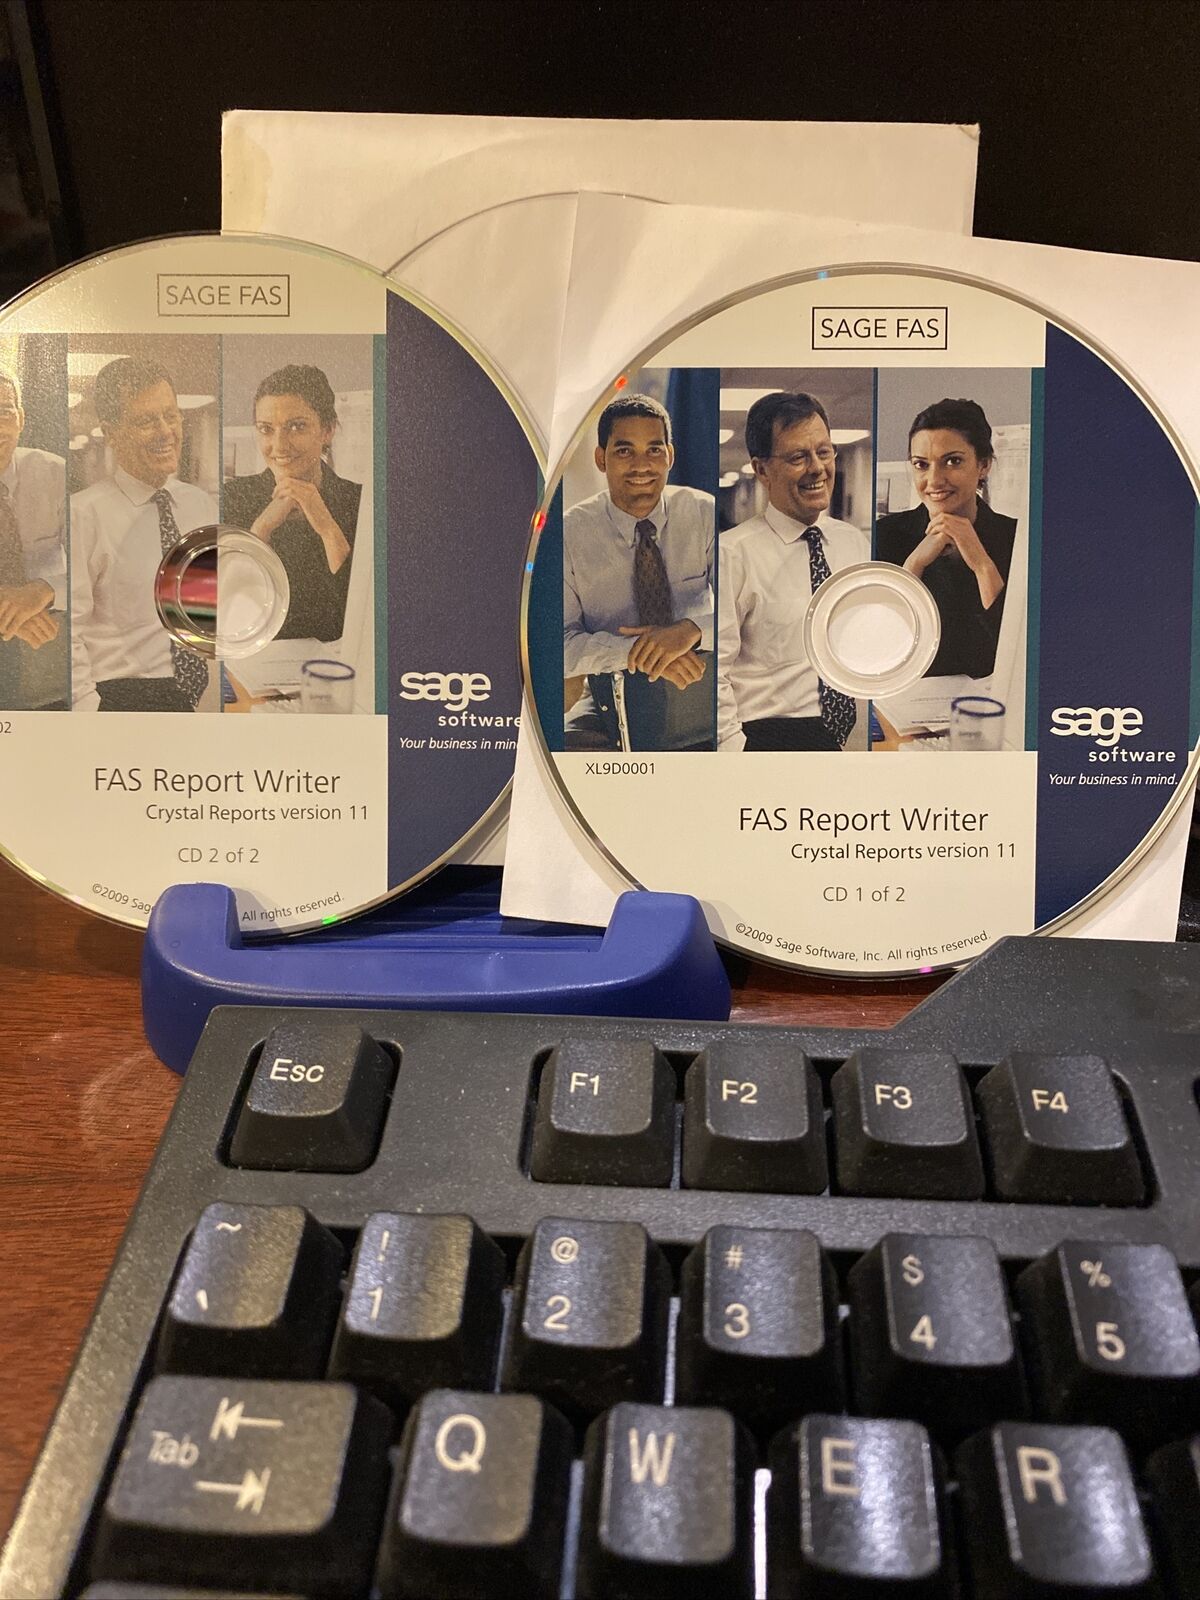 Brand New Sage FAS Report Writer CRYSTAL REPORTS Version 11 2CDs.